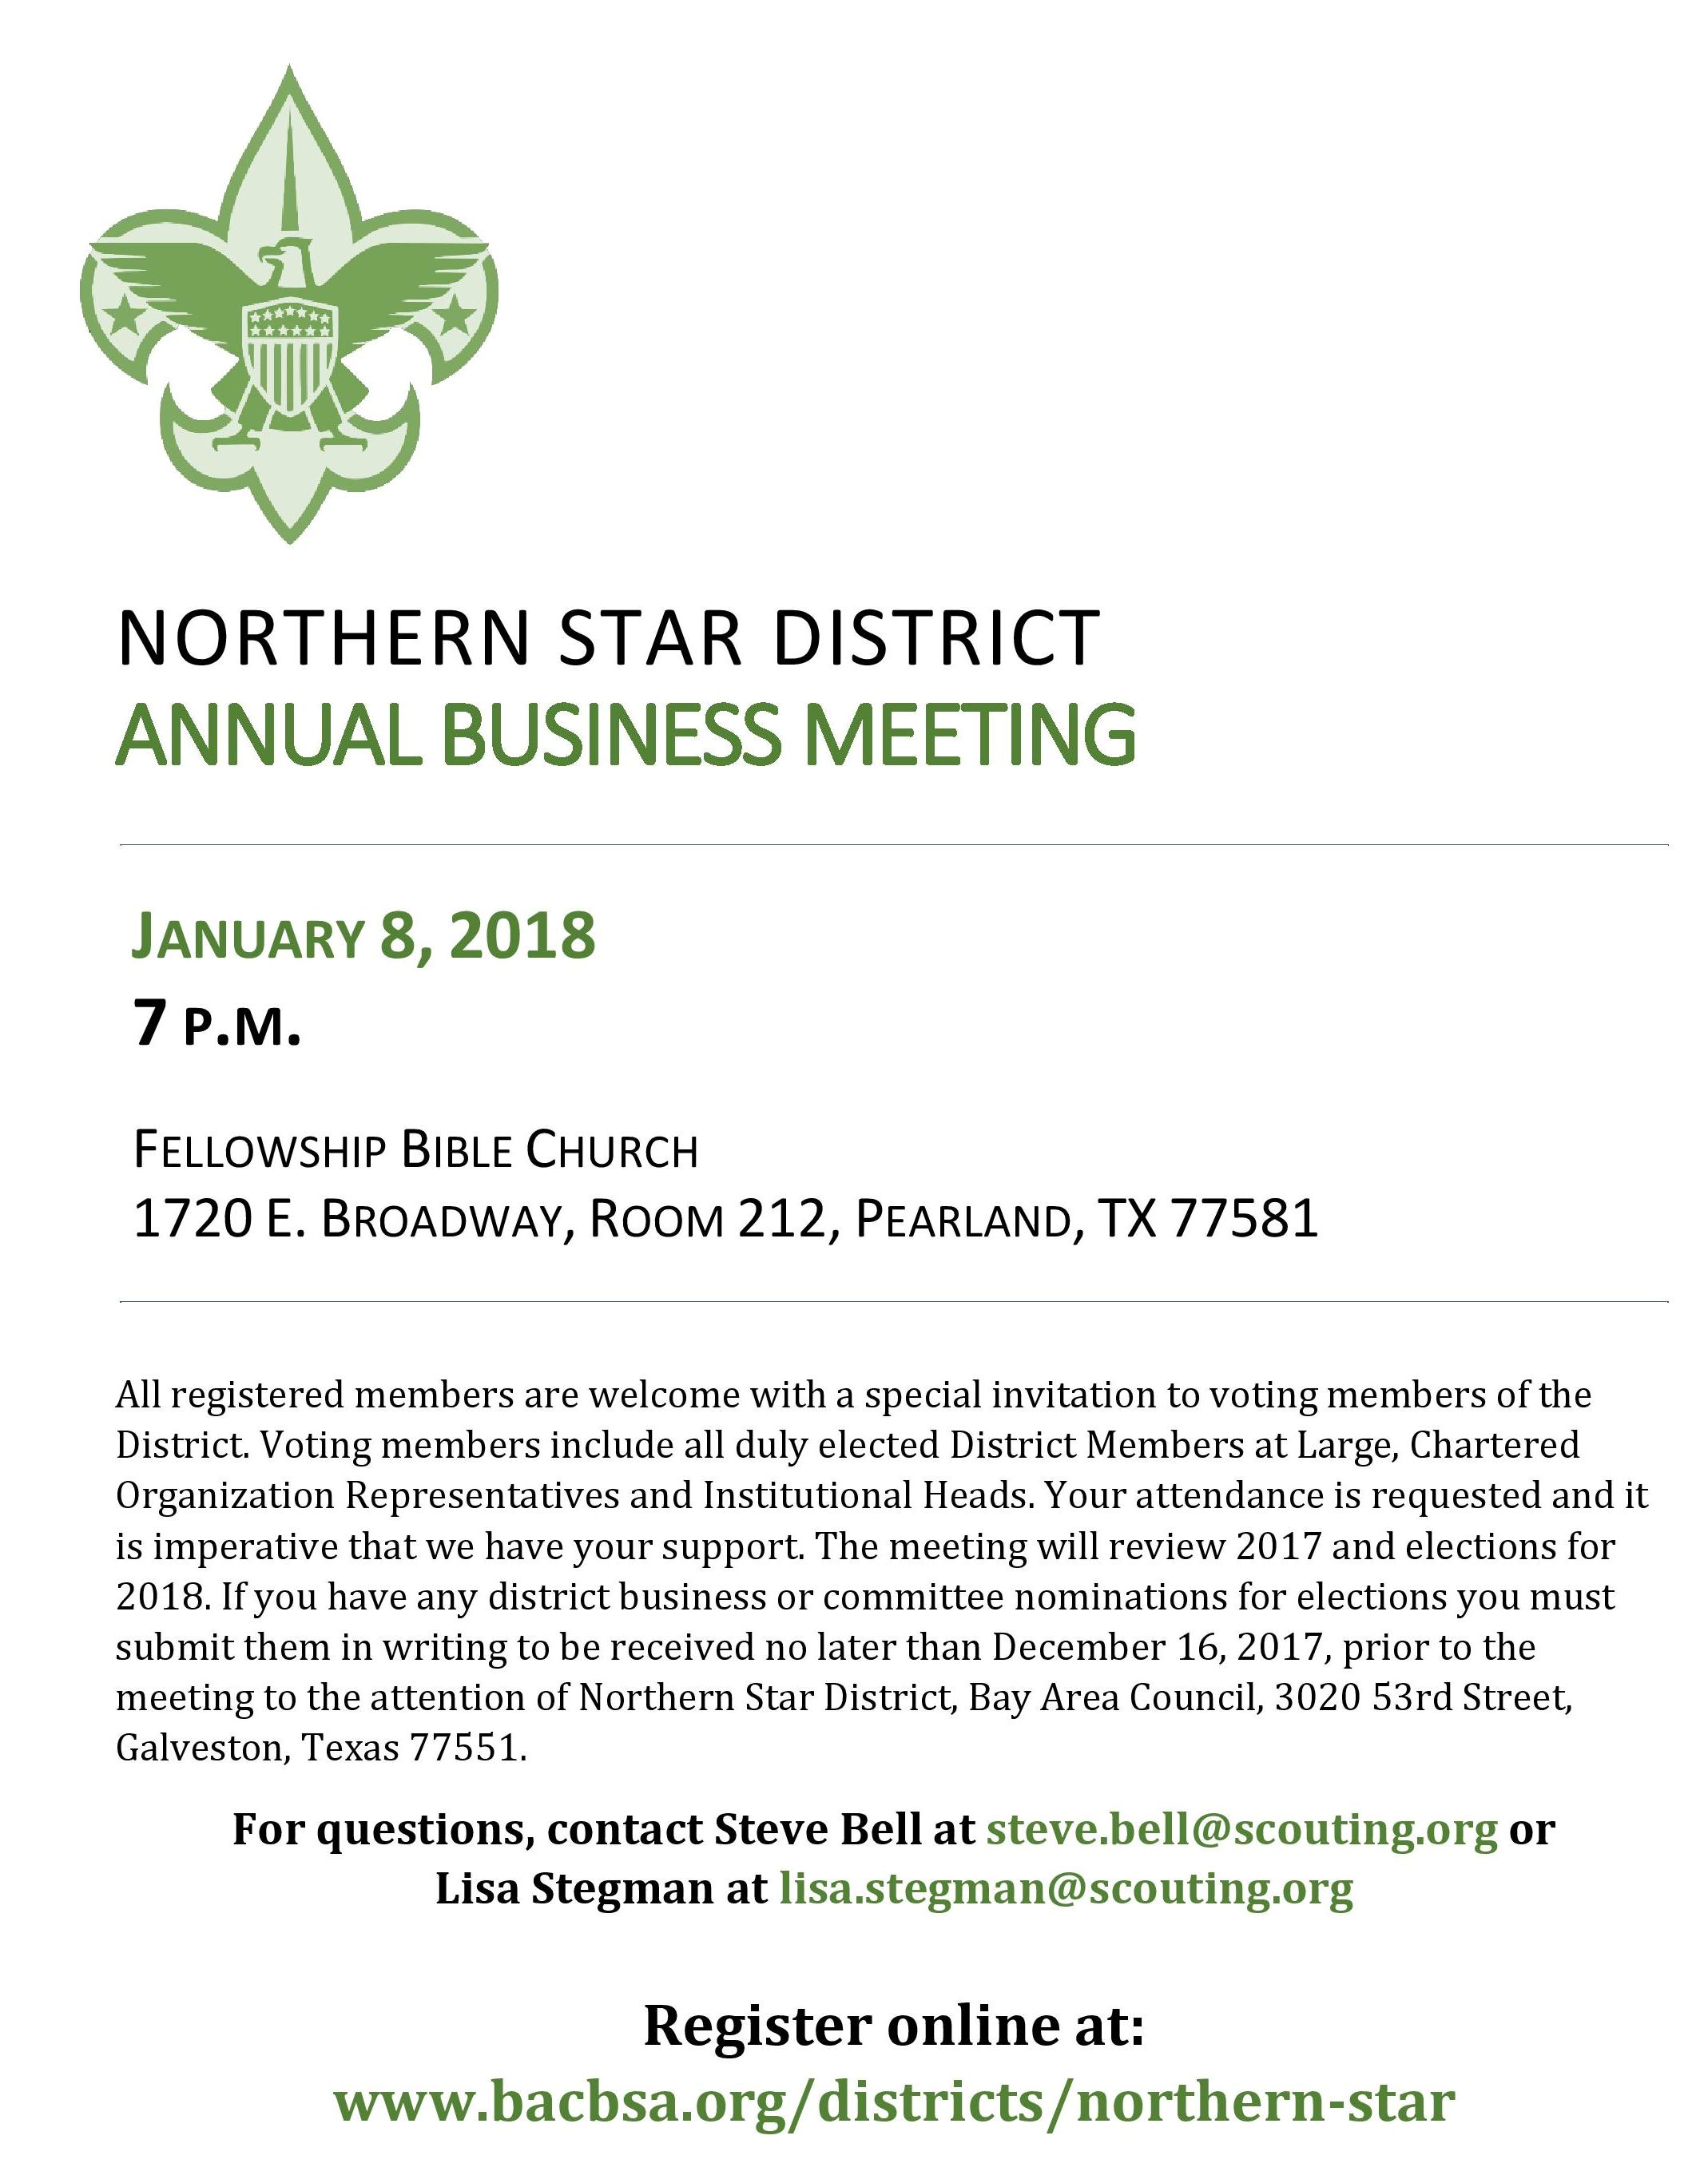 Northern Star Annual Business Meeting